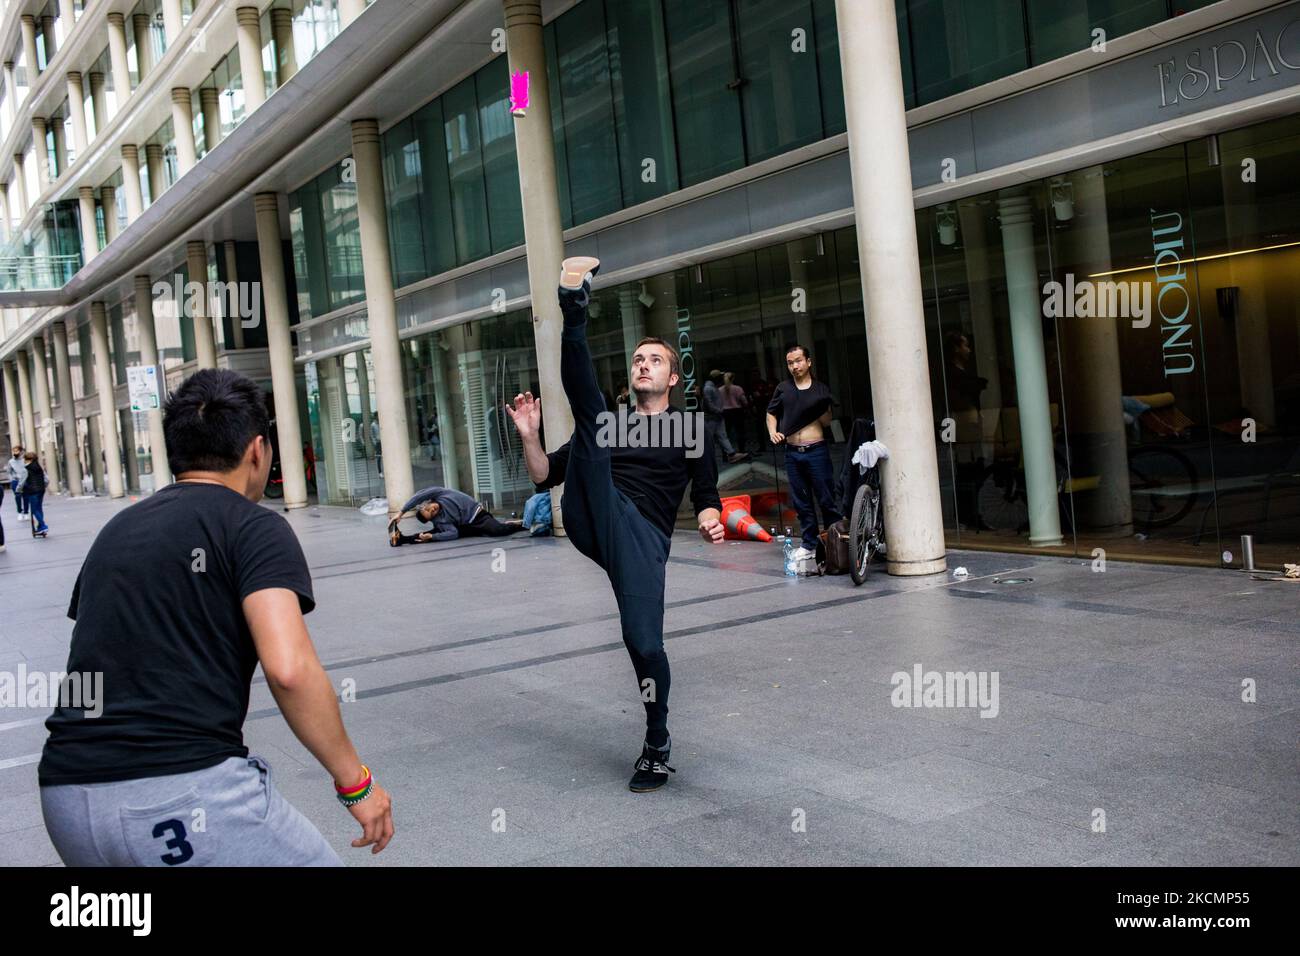 Paris, France on 23 May 2021. Frederic Viana Gomes, a Plumfoot player makes a smash during a freestyle session at the Passage des Jacobins. To date, 4 clubs are active in France: Dunkerque, Paris, Puteaux and Marseille, with about 150 members. Stock Photo